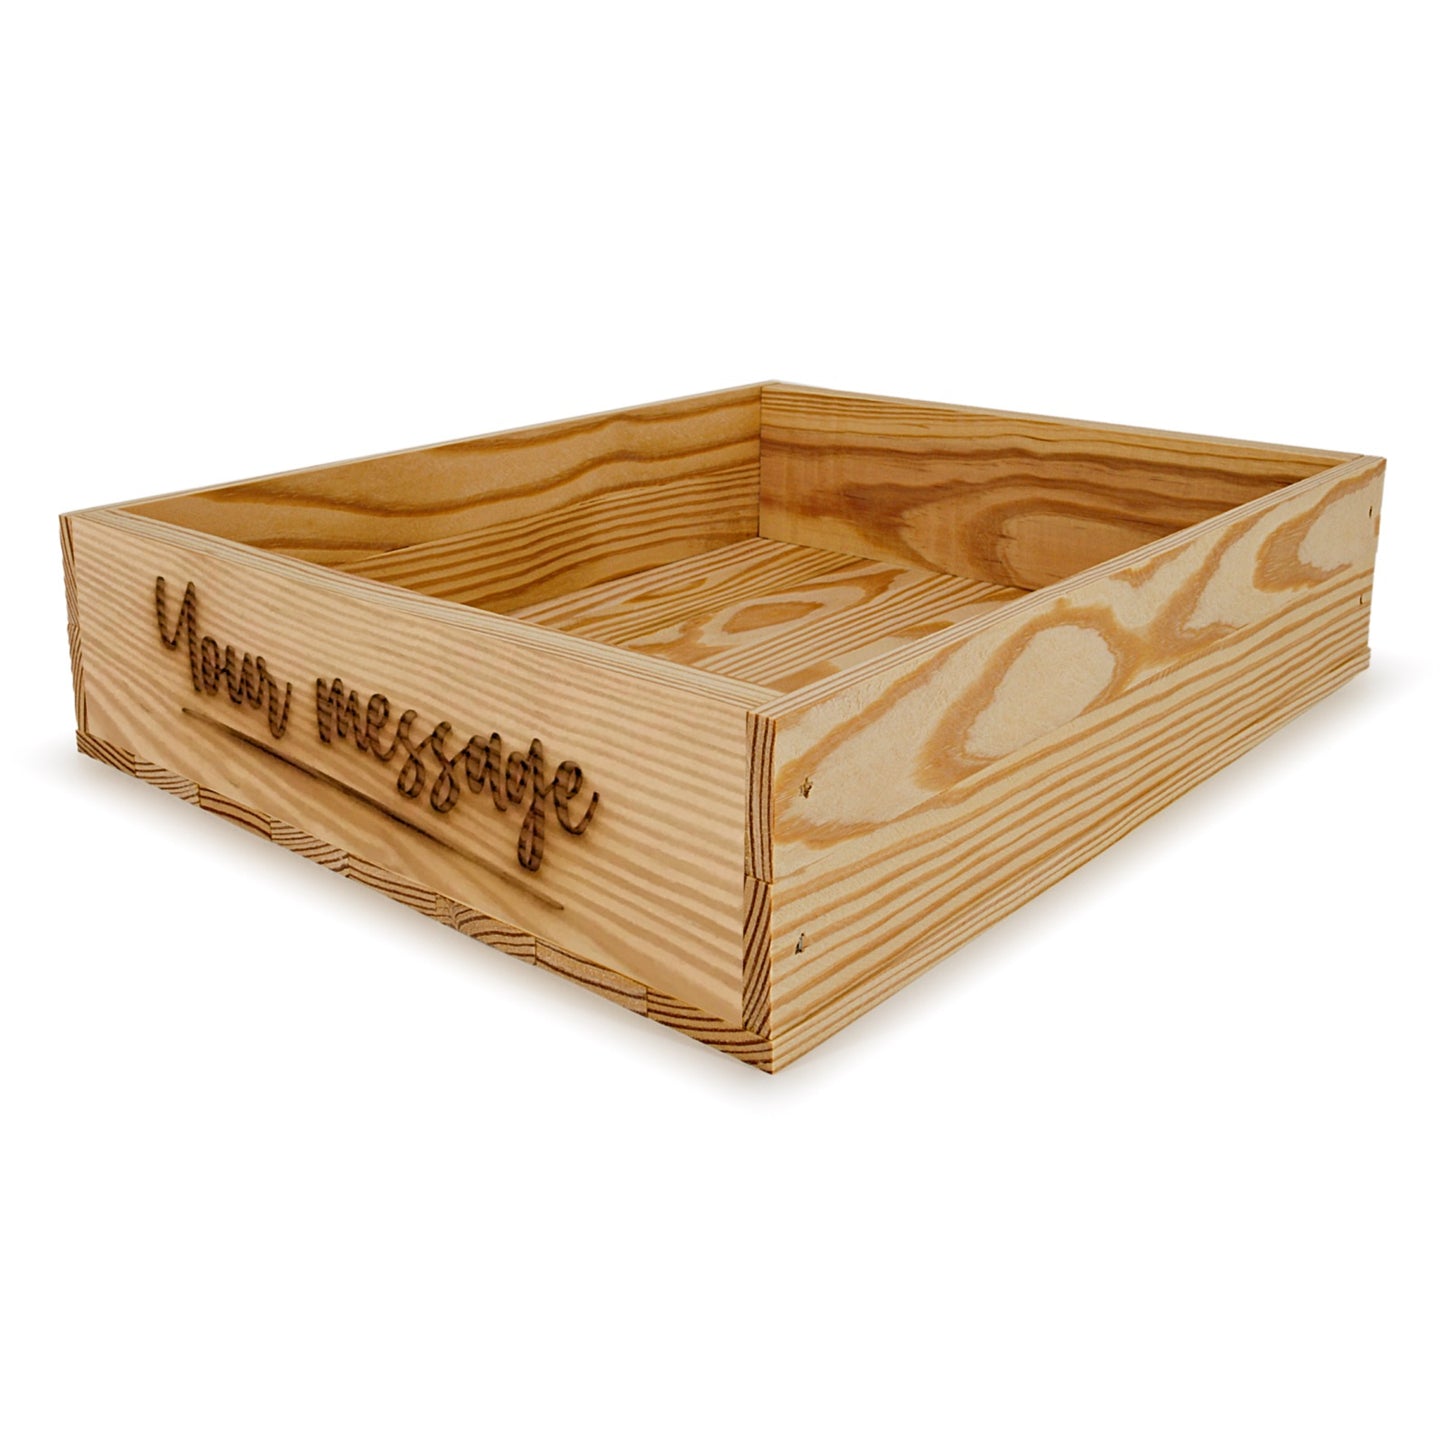 Small wooden crate with custom message 16x13.25x3.5, 6-BX-16-13.25-3.5-ST-NW-NL, 12-BX-16-13.25-3.5-ST-NW-NL, 24-BX-16-13.25-3.5-ST-NW-NL, 48-BX-16-13.25-3.5-ST-NW-NL, 96-BX-16-13.25-3.5-ST-NW-NL